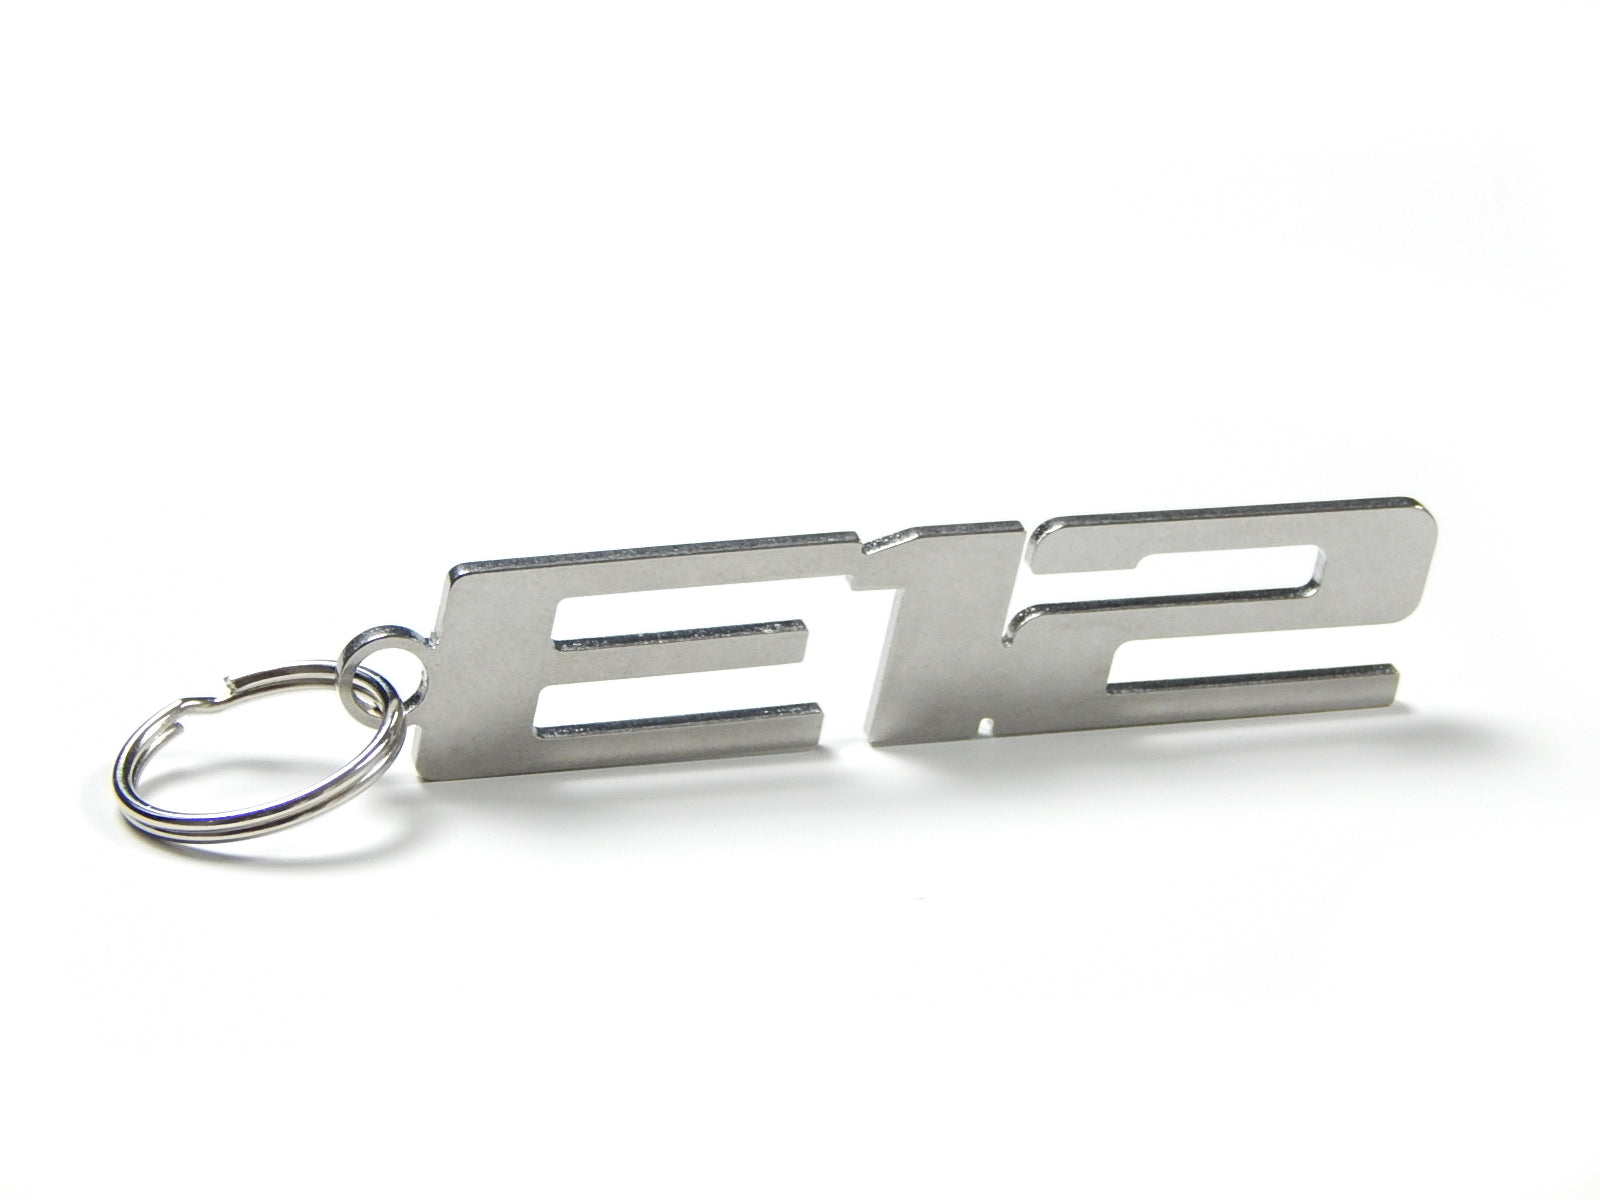 7er BMW Keychain Stainless Steel brushed – DisagrEE